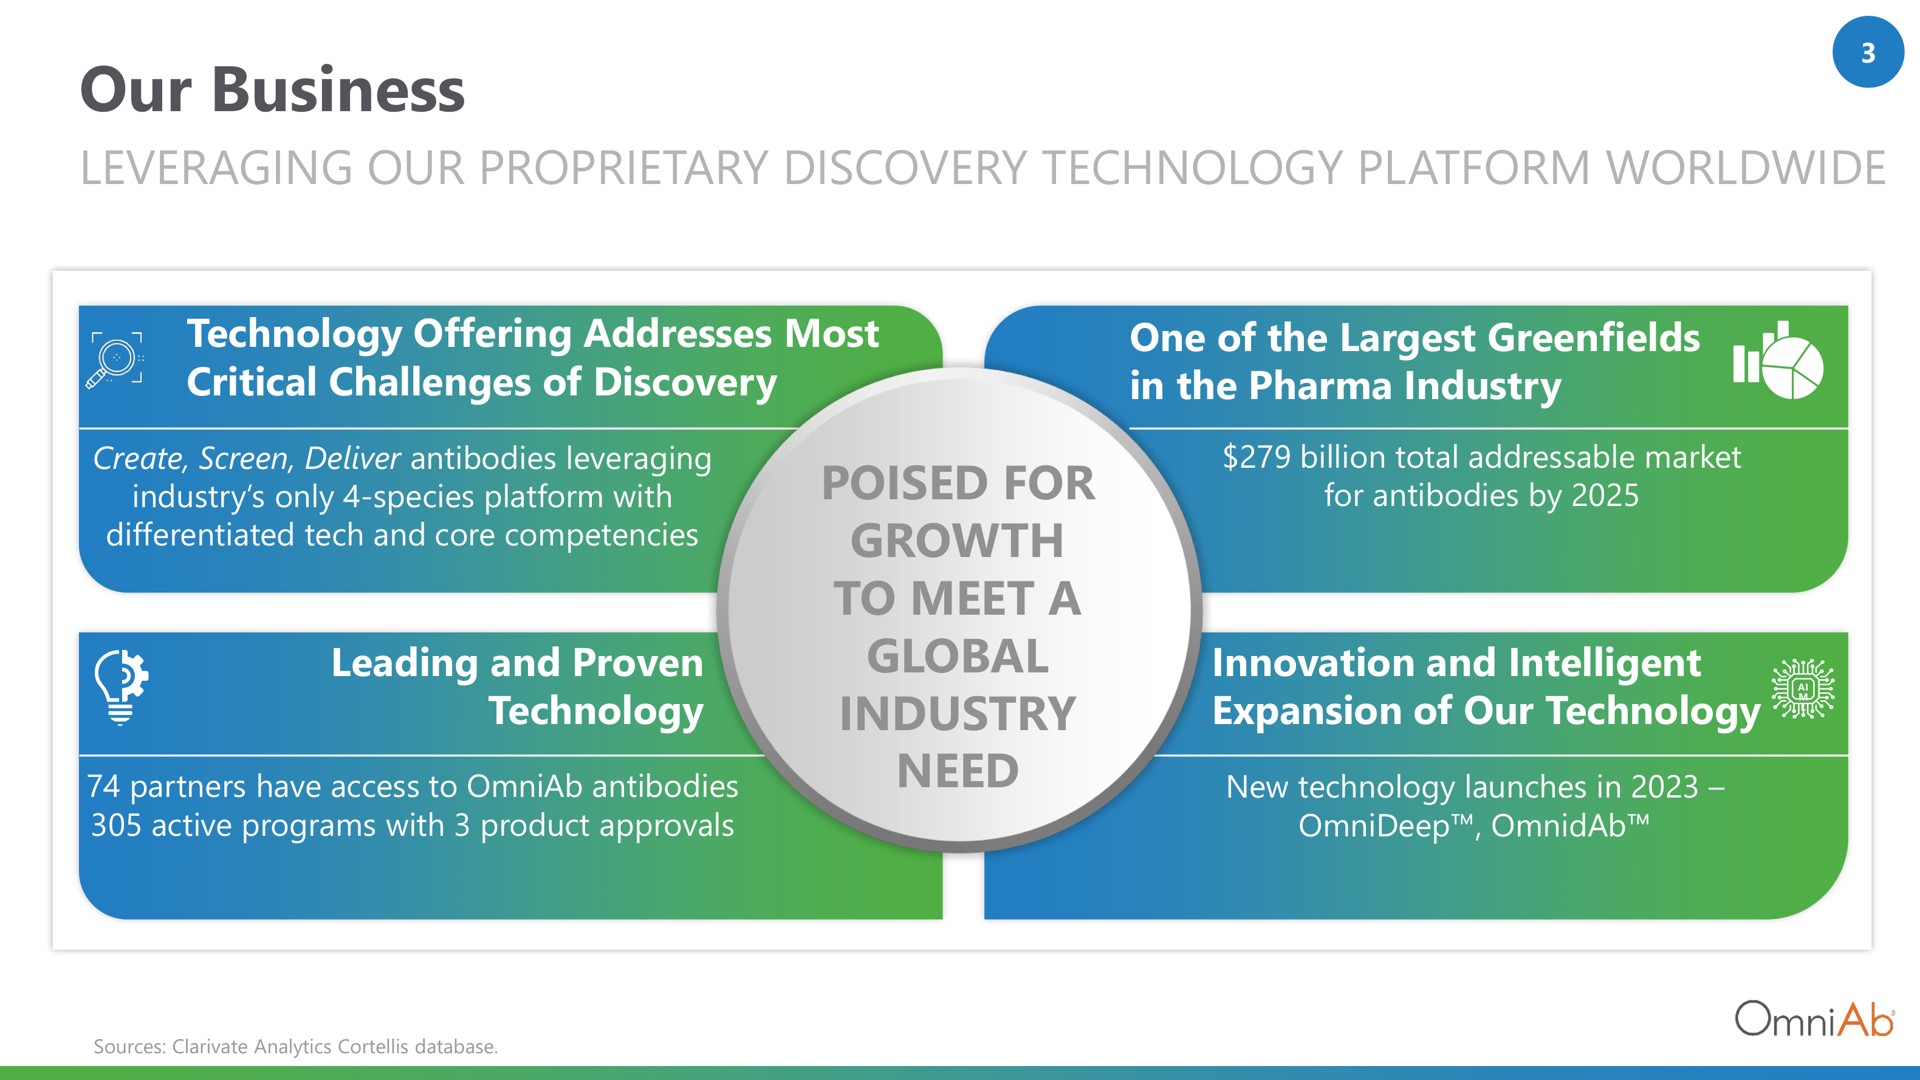 our business leveraging our proprietary discovery technology platform poised for growth to meet a global industry need | OmniAb